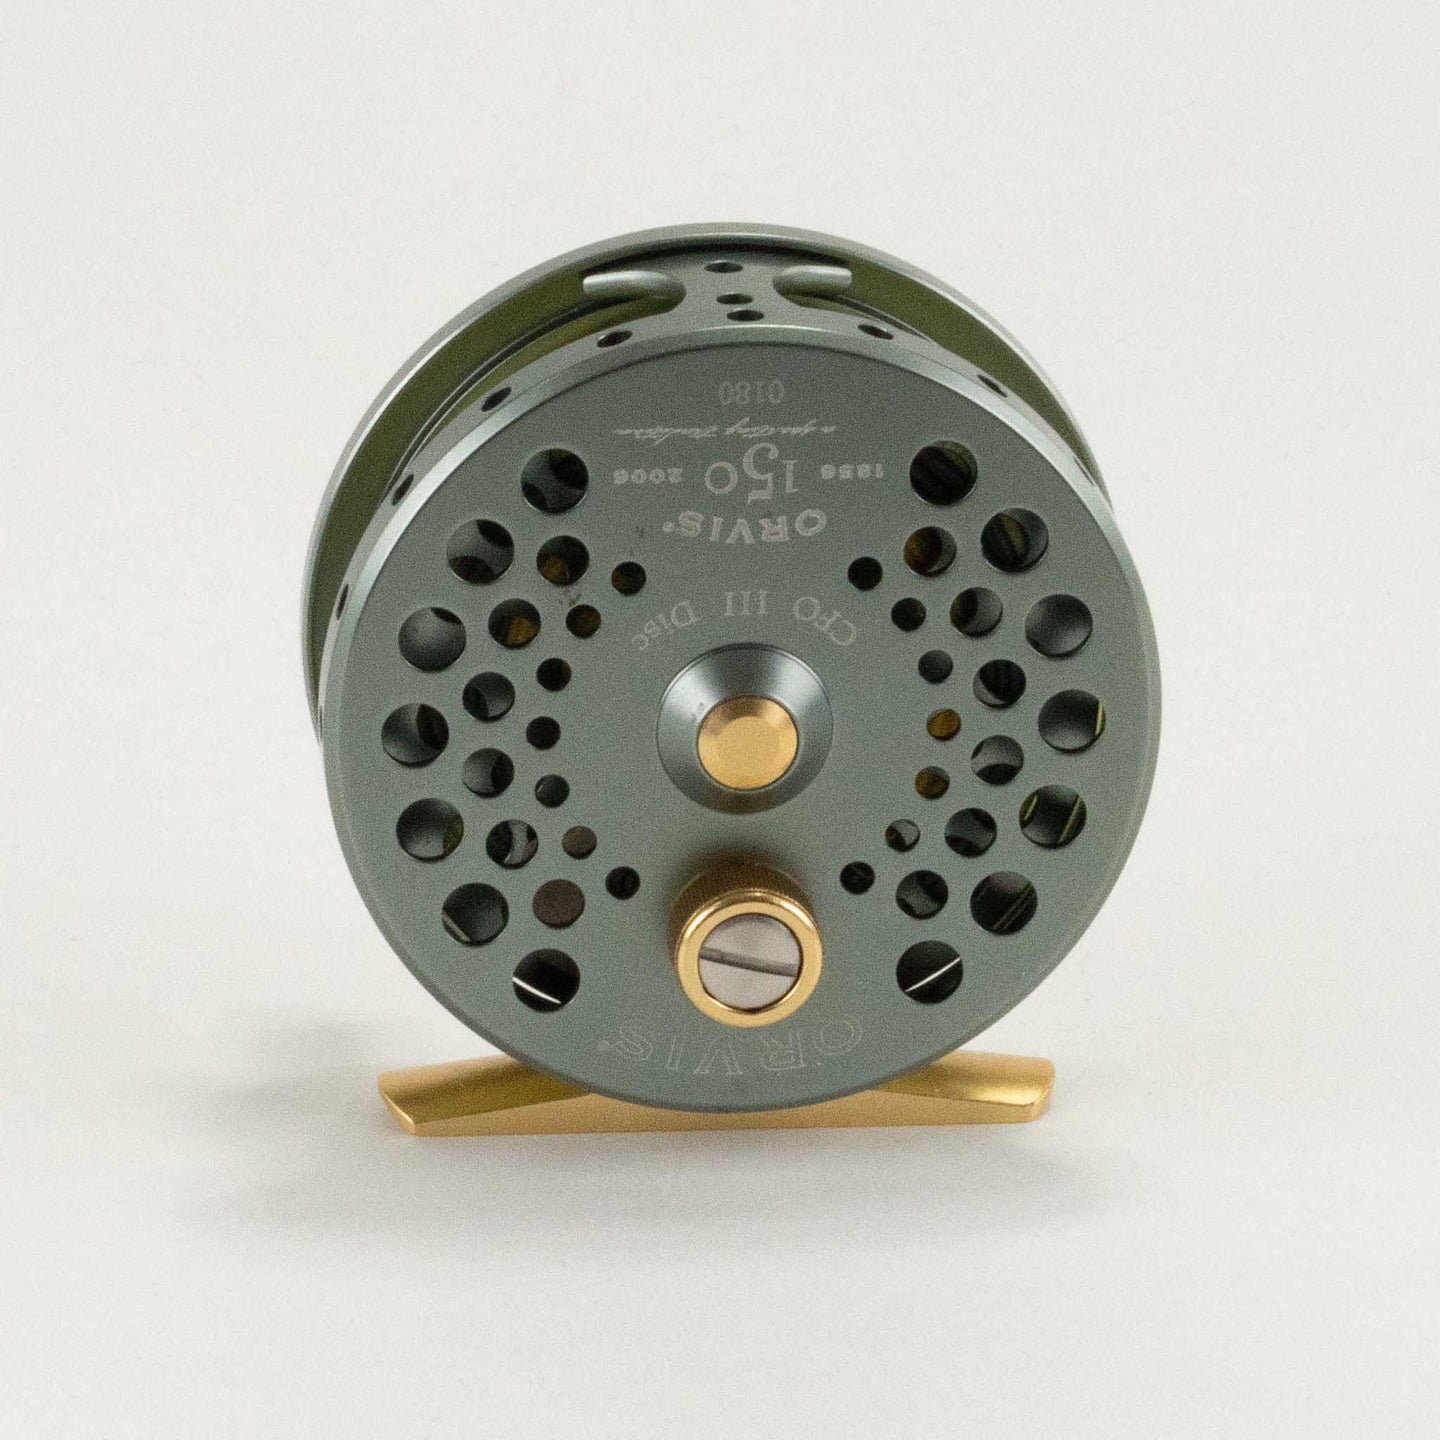 Orvis CFO III Disc Limited Edition Fly Reel 3-4 LHR